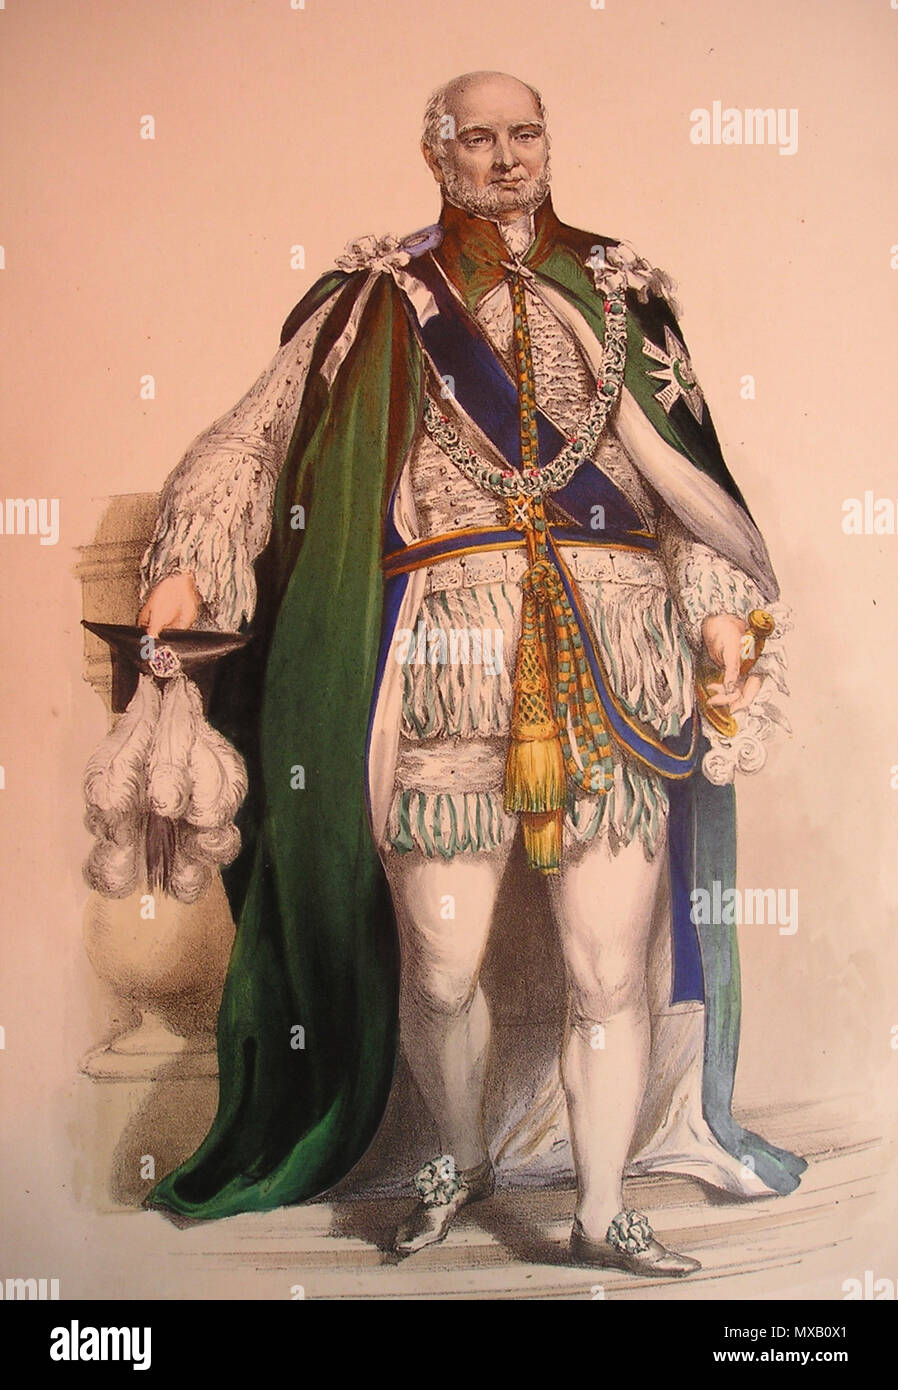 . Prince Augustus Frederick, Duke of Sussex wearing the robes of a Knight Companion of the Order of the Thistle . 17 February 2007. Artist: G.E. Madeley (fl.1826–1841, date of death unknown). Photograph by User:Dr pda 344 Knight of the Order of the Thistle Stock Photo